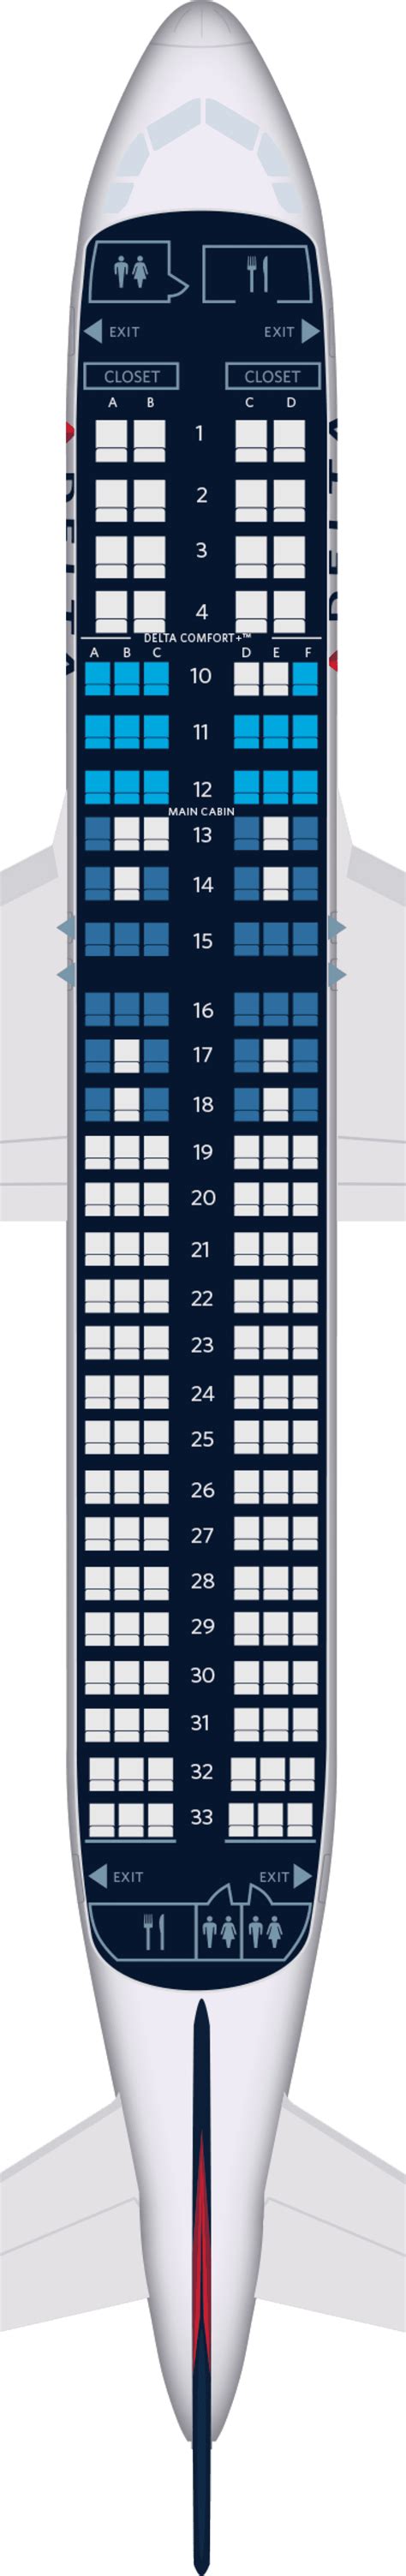 Economy. Seats 168. Pitch 30-32". Width 17.5". Recline 3". Travelers on the state-of-the-art Airbus A320-200 V.1 family, will find an economy class that stands out. Designed for 168 passengers, it boasts modern amenities, comfortable seating, and an advanced entertainment system. The crew's dedication ensures a smooth and enjoyable journey.. 